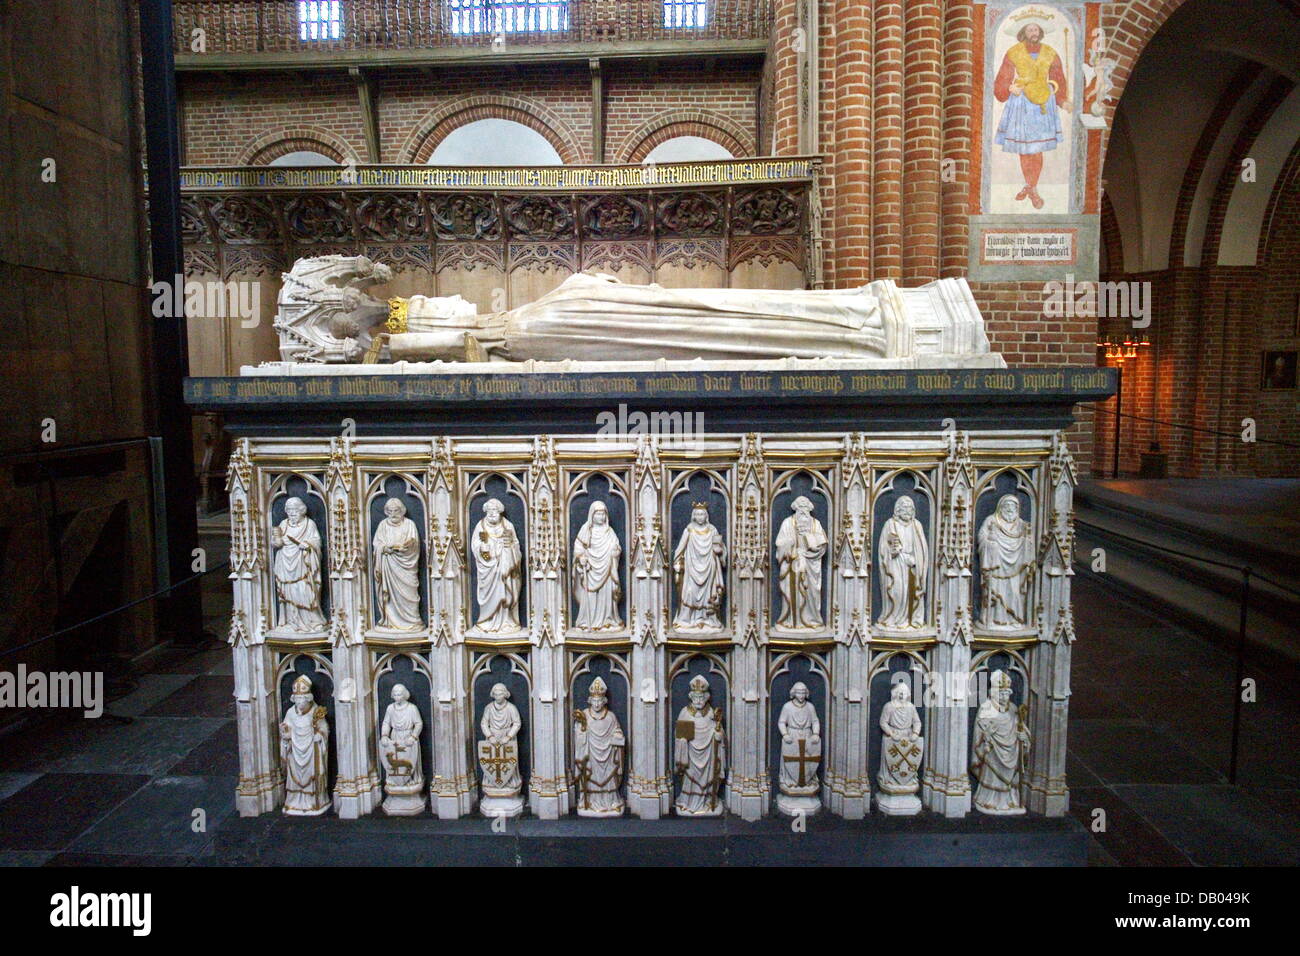 The photo shows a richly ornated stone sarcophagus inside Roskilde cathedral, Denmark, 23 May 2007. The cathedral was declared UNESCO World Cultural Heritage in 1995. Construction started in Romanic style in 1170 and was continued in Gothic style from 1200 onwards. 20 Danish kings and 17 queens are entombed at the cathedral. Photo: Maurizio Gambarini Stock Photo